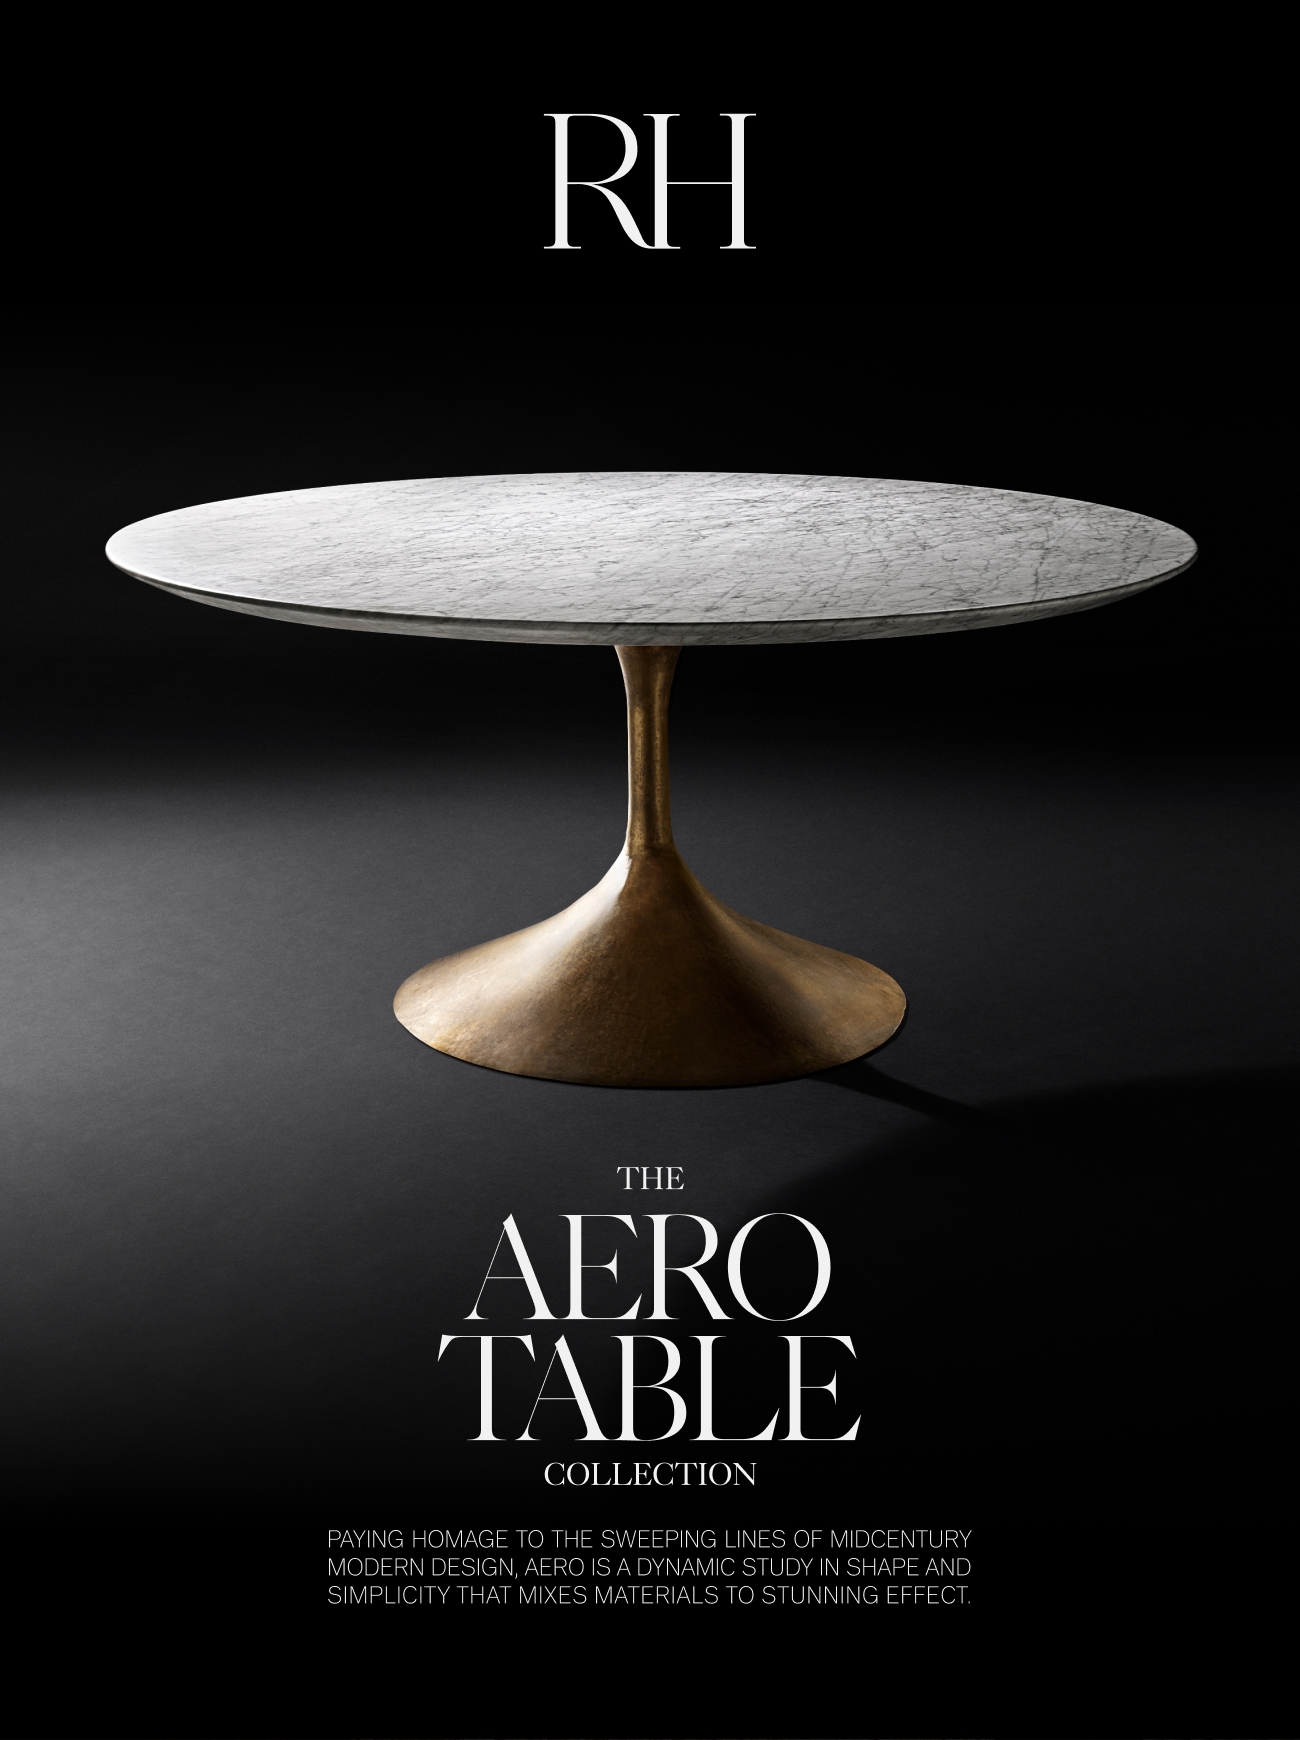  KBS VIR COLLECTION PAYING HOMAGE TO THE SWEEPING LINES OF MIDCENTURY MODERN DESIGN, AERO IS A DYNAMIC STUDY IN SHAPE AND SIMPLICITY THAT MIXES MATERIALS TO STUNNING EFFECT. 